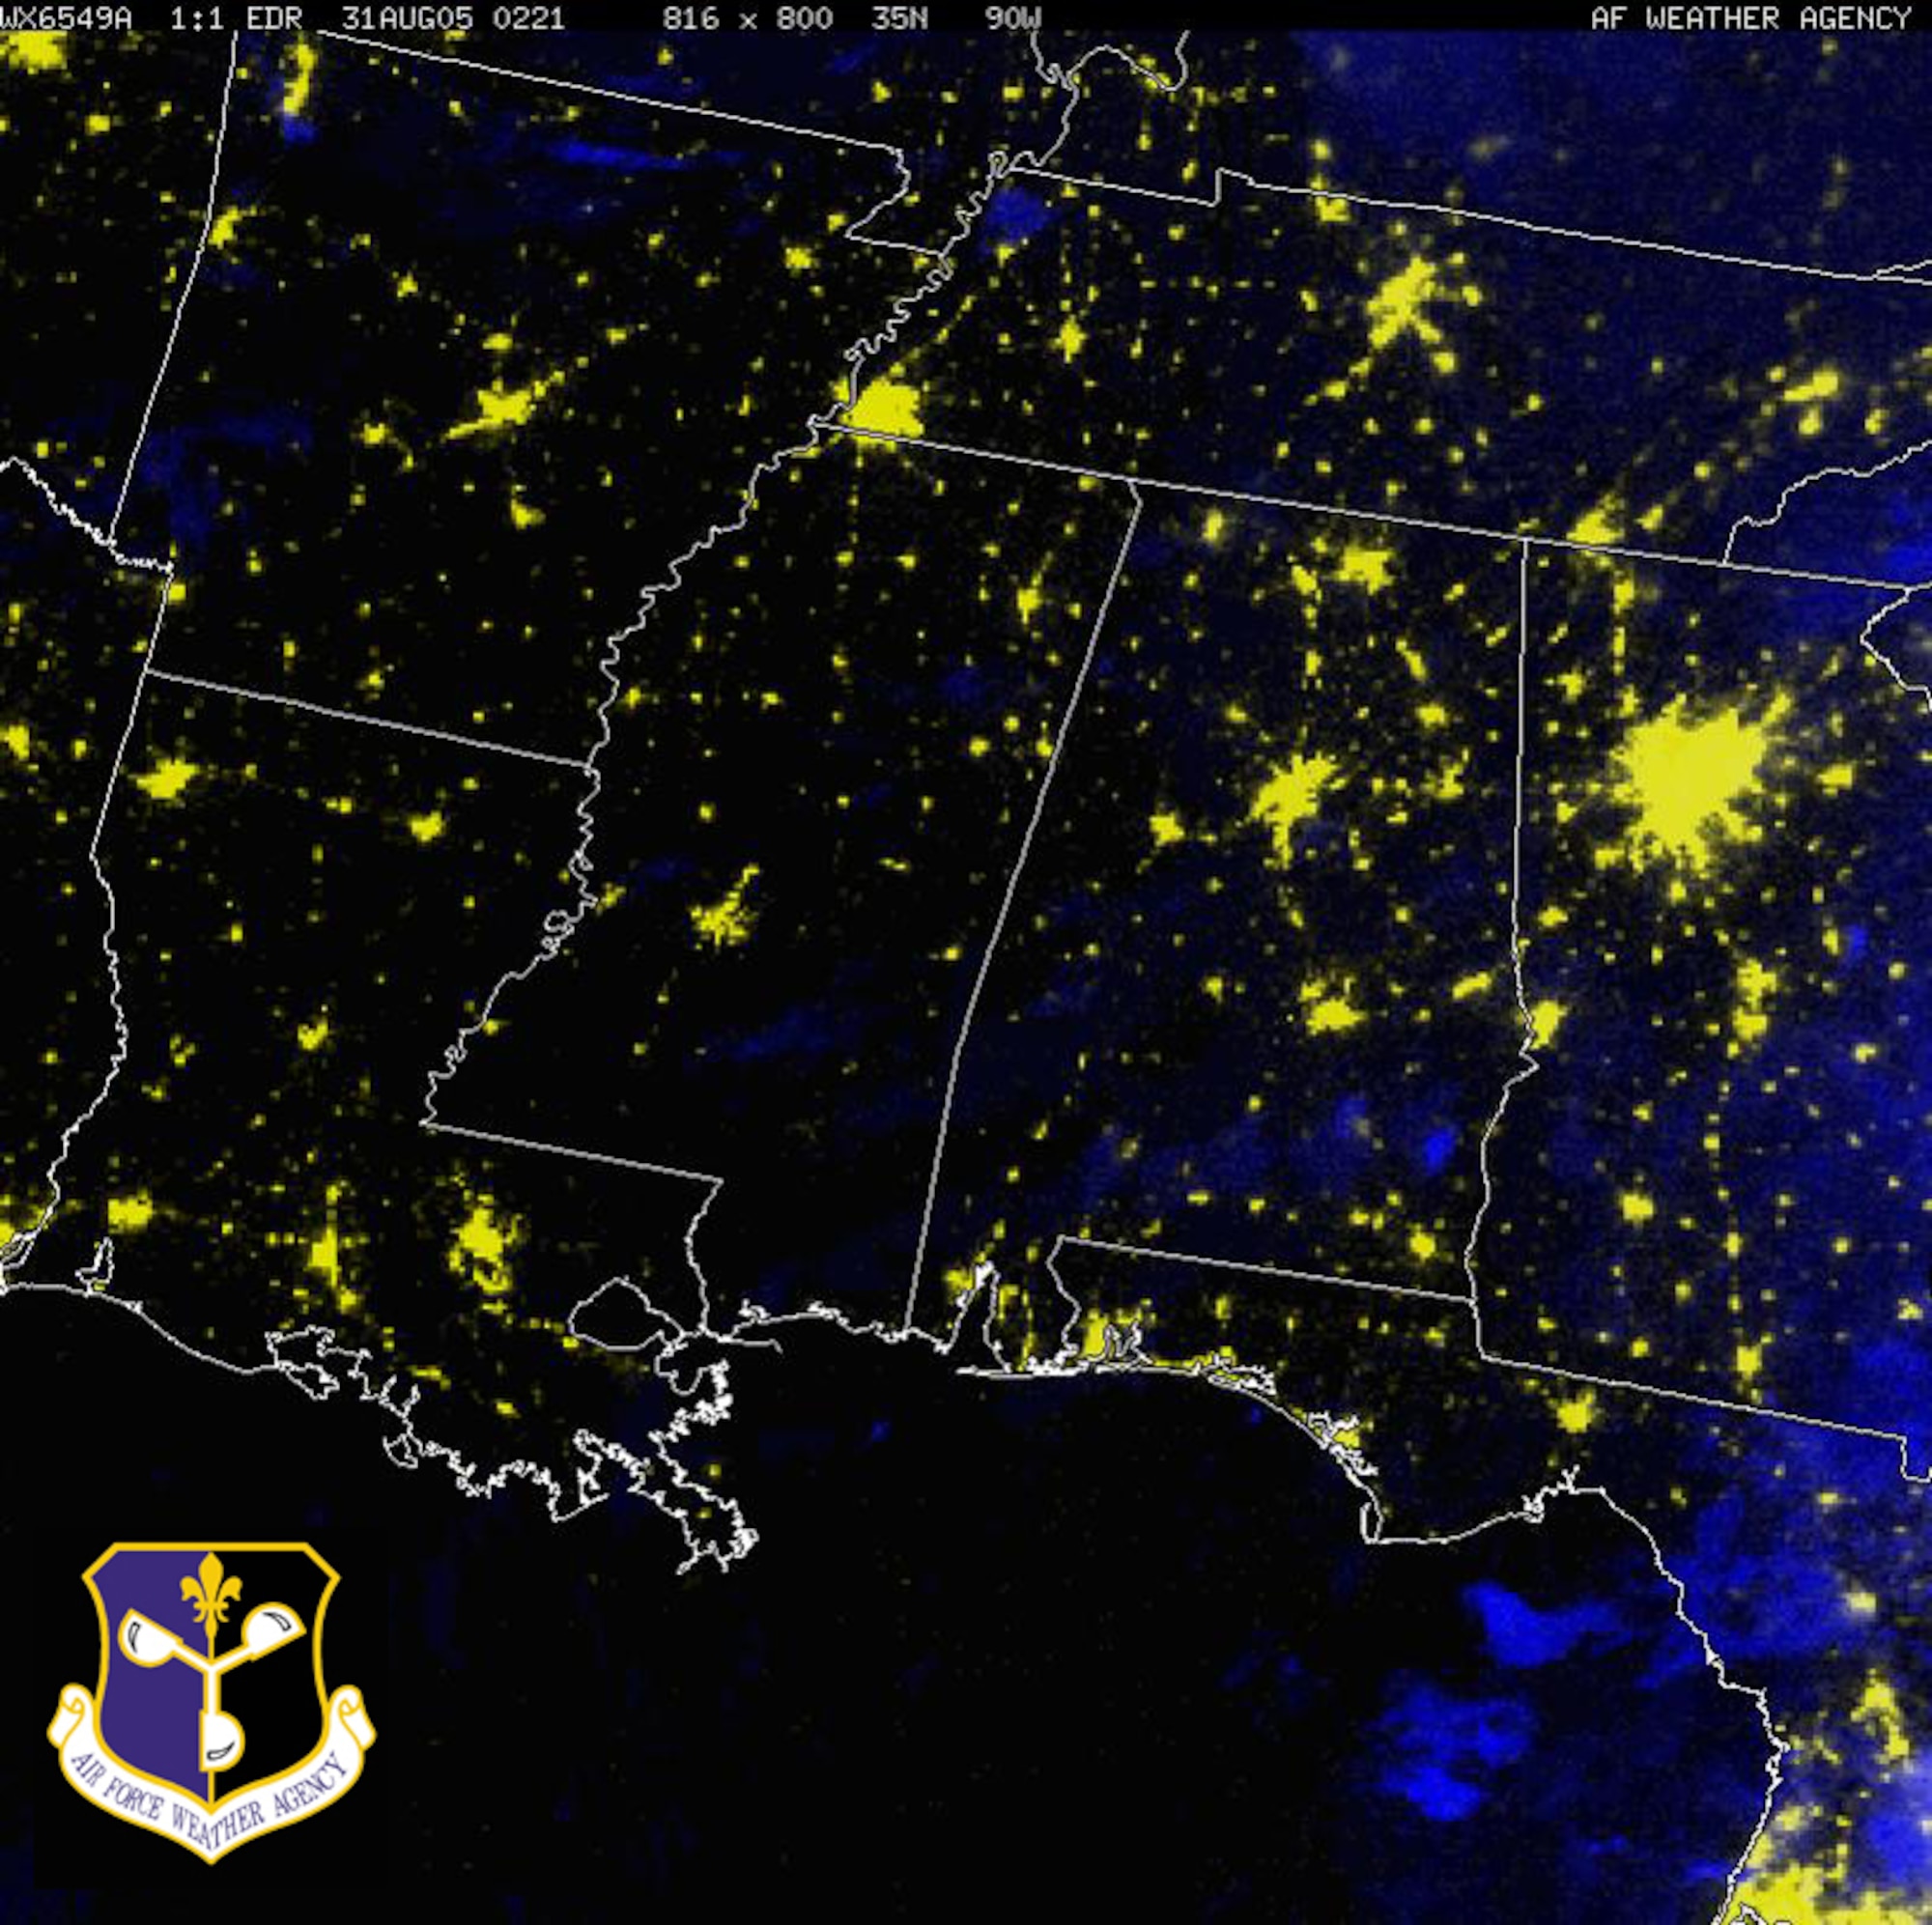 A Defense Meteorological Satellite nighttime image of the wide-spread power outages across the Gulf Coast of the United States after Hurricane Katrina ravaged the area. The DMSP F-15 satellite image from 9:21 p.m. (CST) Aug. 30, is a 1.5nm Resolution, Visible/Infrared composite with the Infrared portion in blue showing clouds and the Visible portion in yellow showing city lights and fires. Image courtesy of the Air Force Weather Agency. 